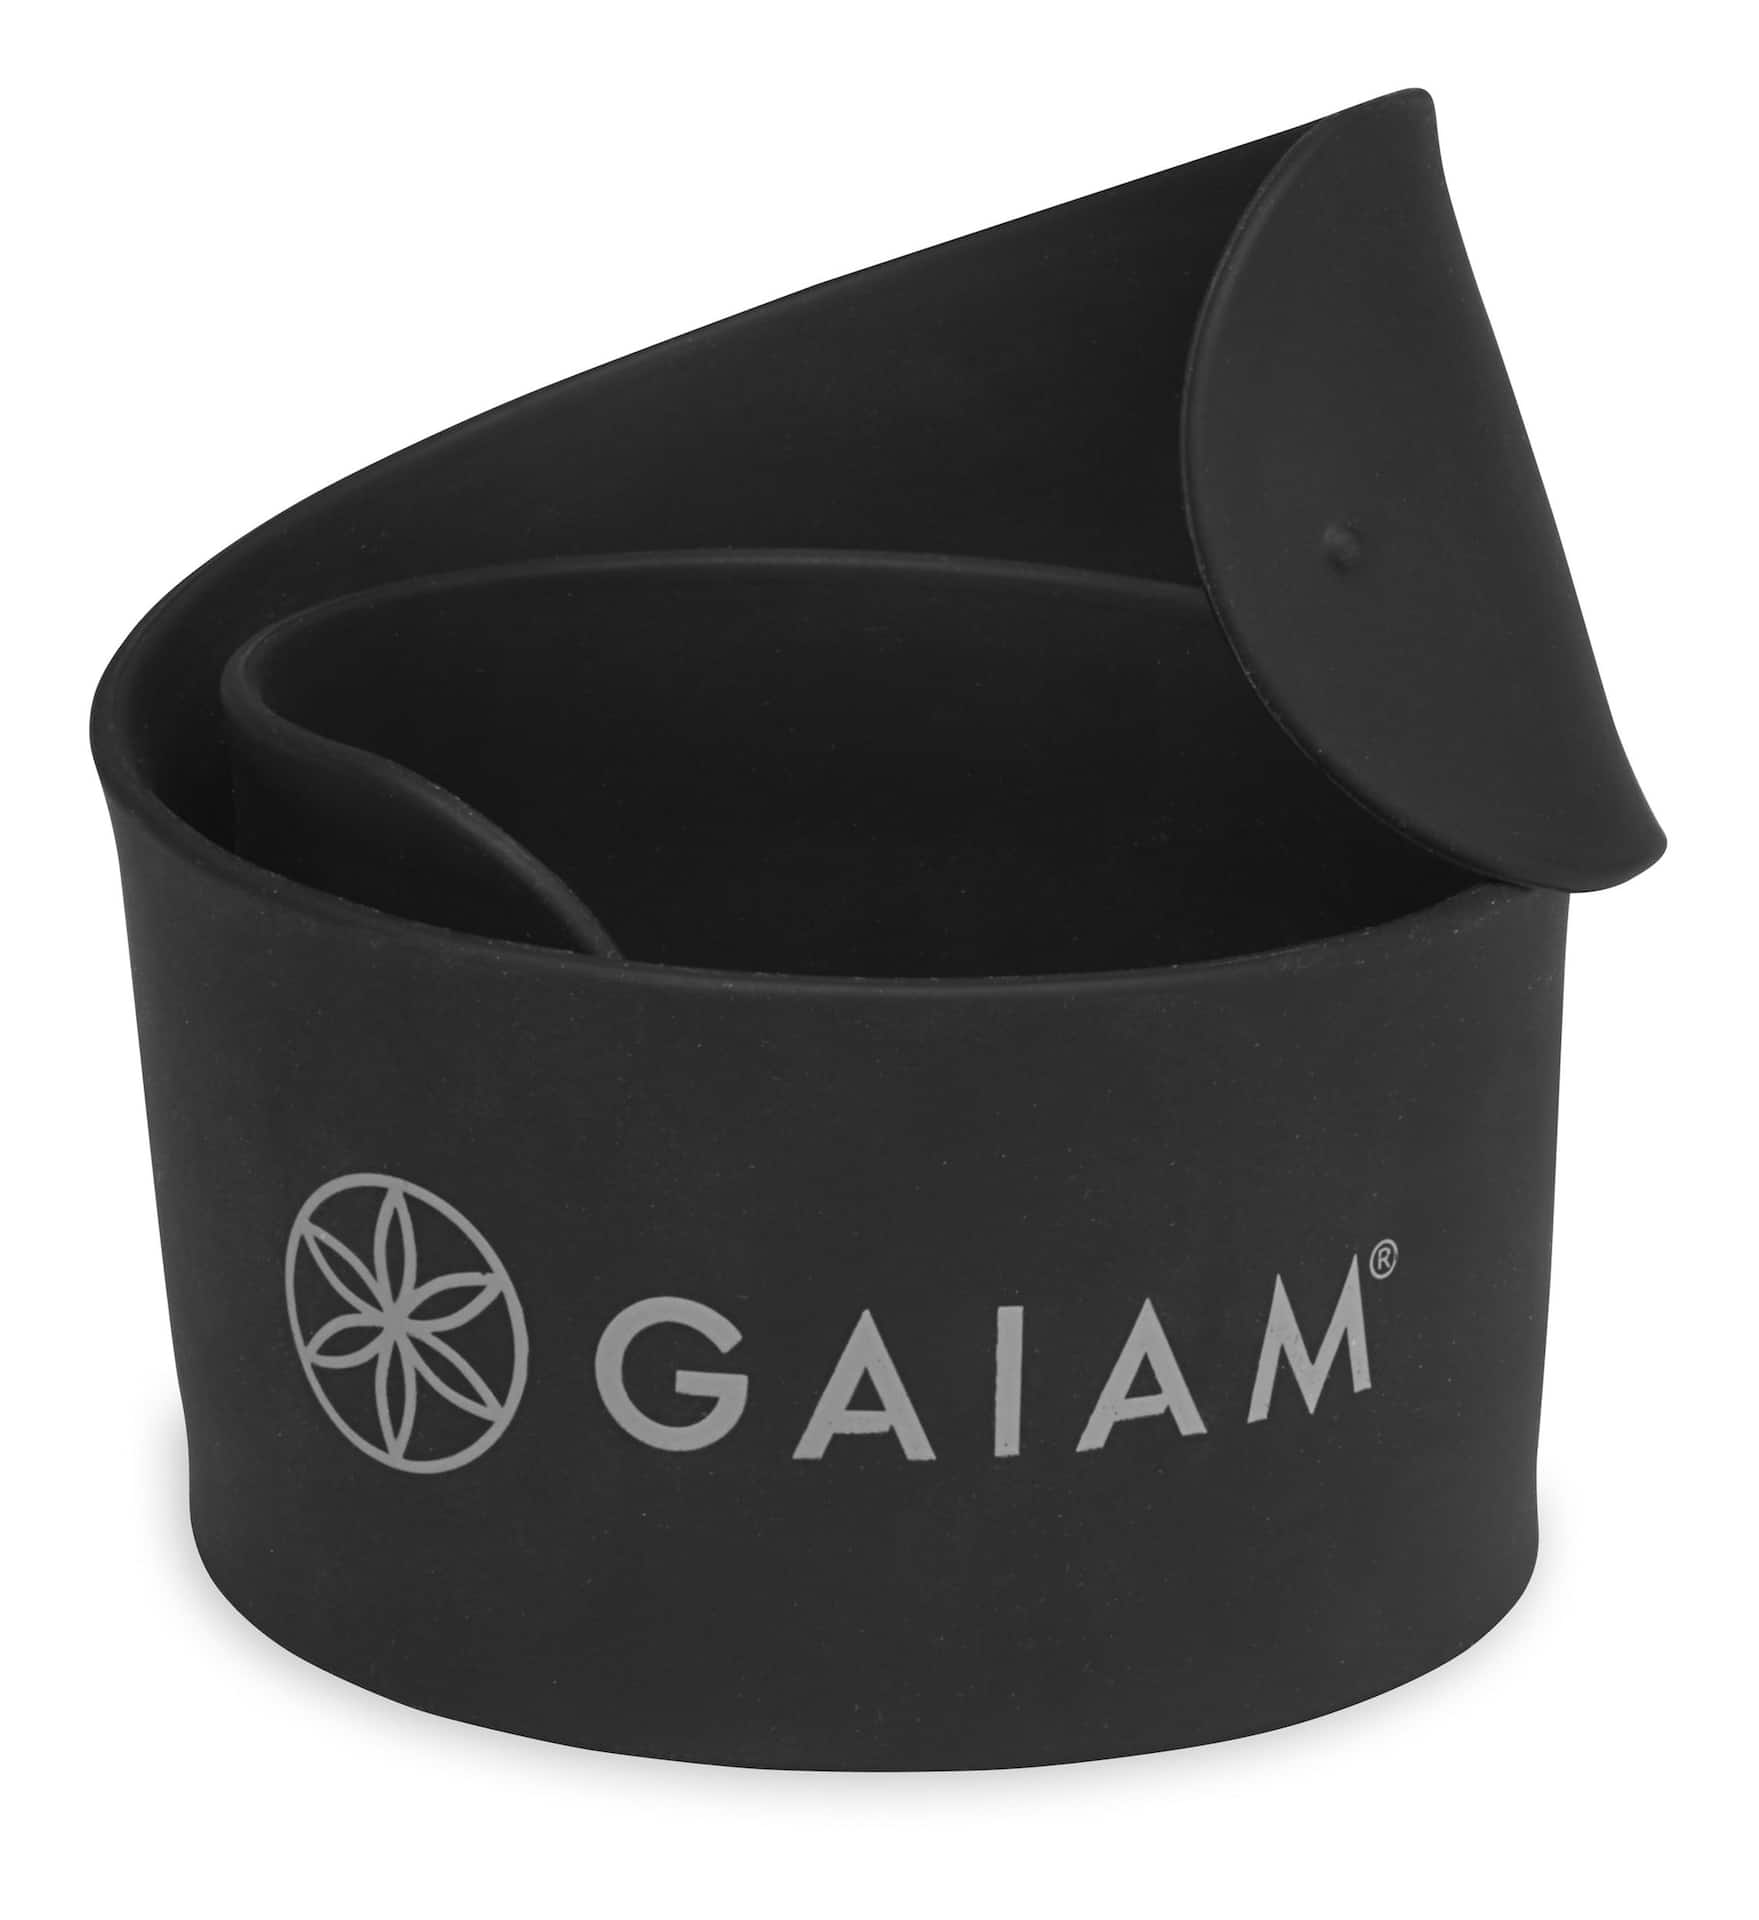 https://media-www.canadiantire.ca/product/playing/exercise/exercise-accessories/1840605/gaiam-yoga-slap-band-b74768d6-ee58-4ffb-b907-f8ab166fab92-jpgrendition.jpg